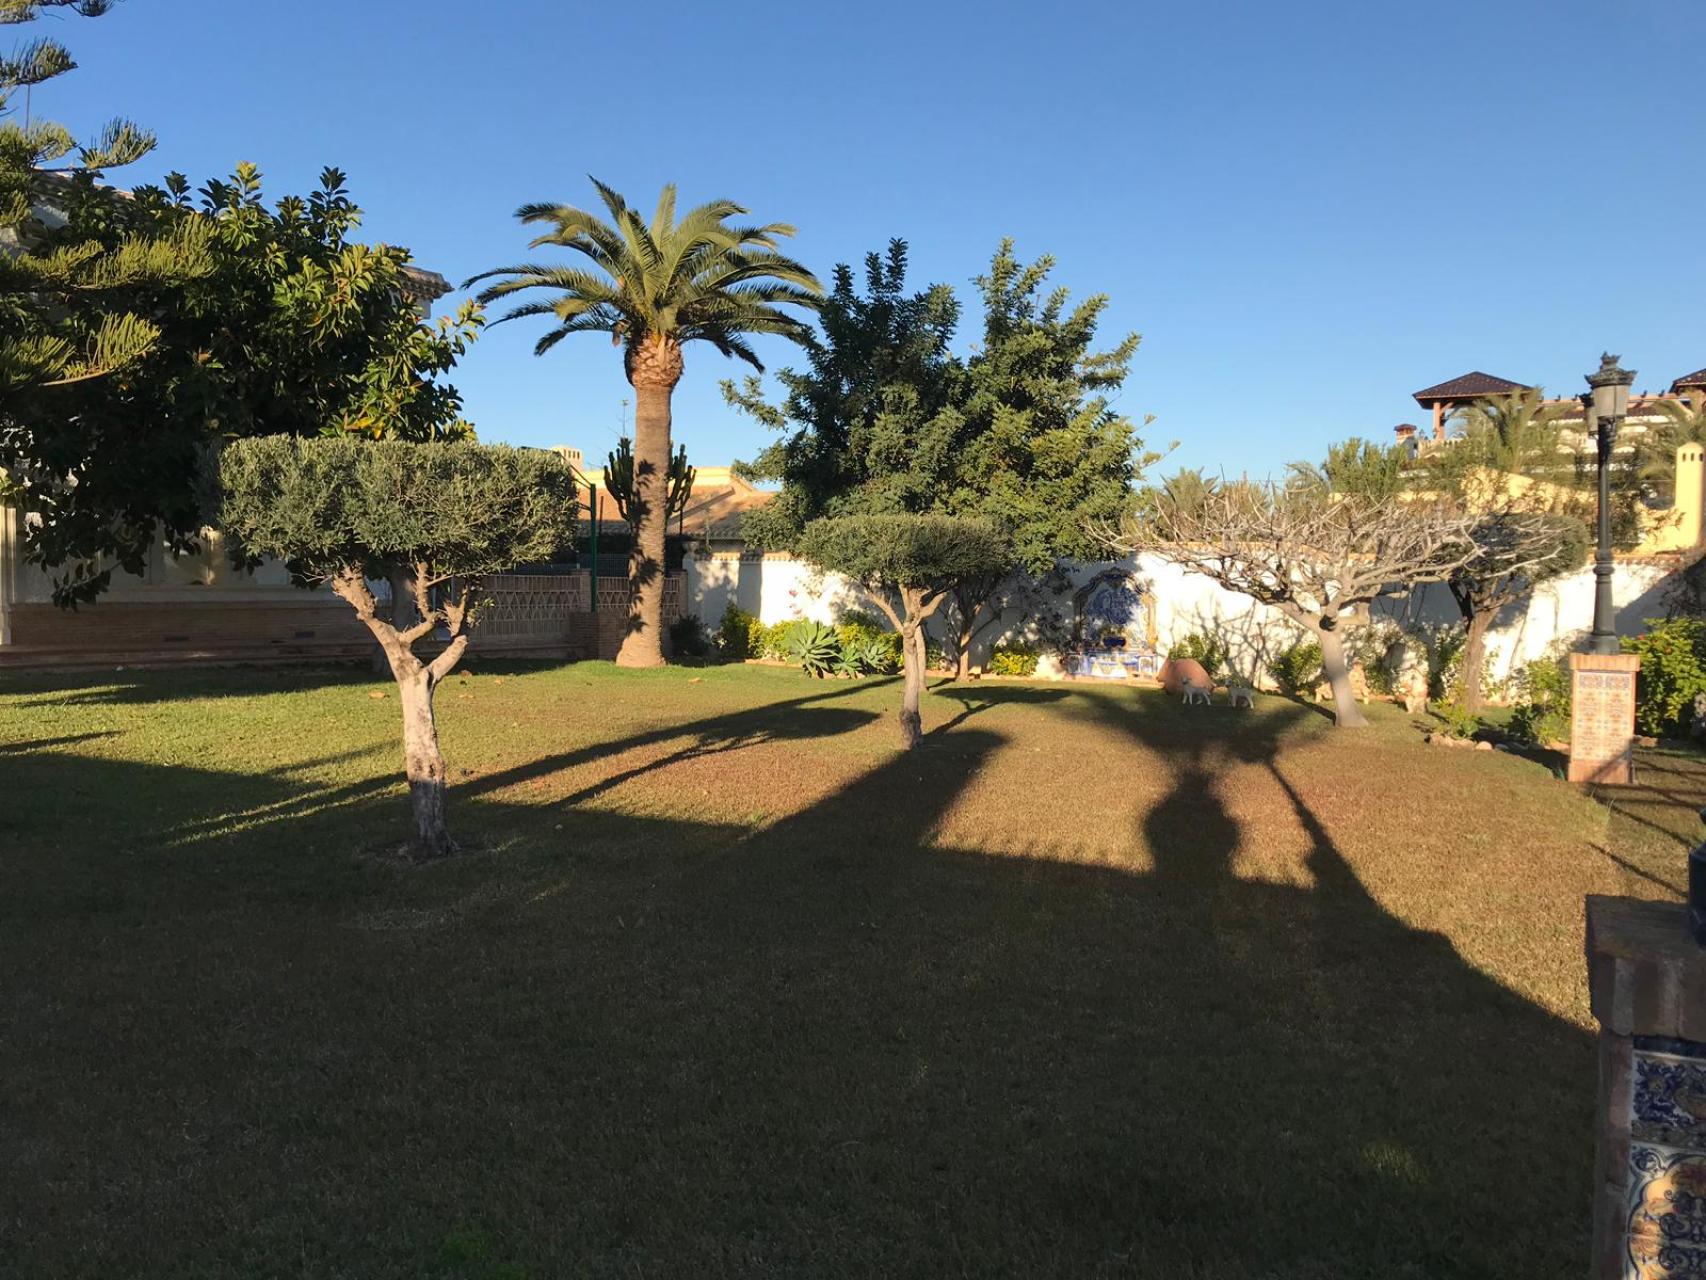 Cabo Roig, 545m2 villa on a 1500m2 plot 250m from the beach